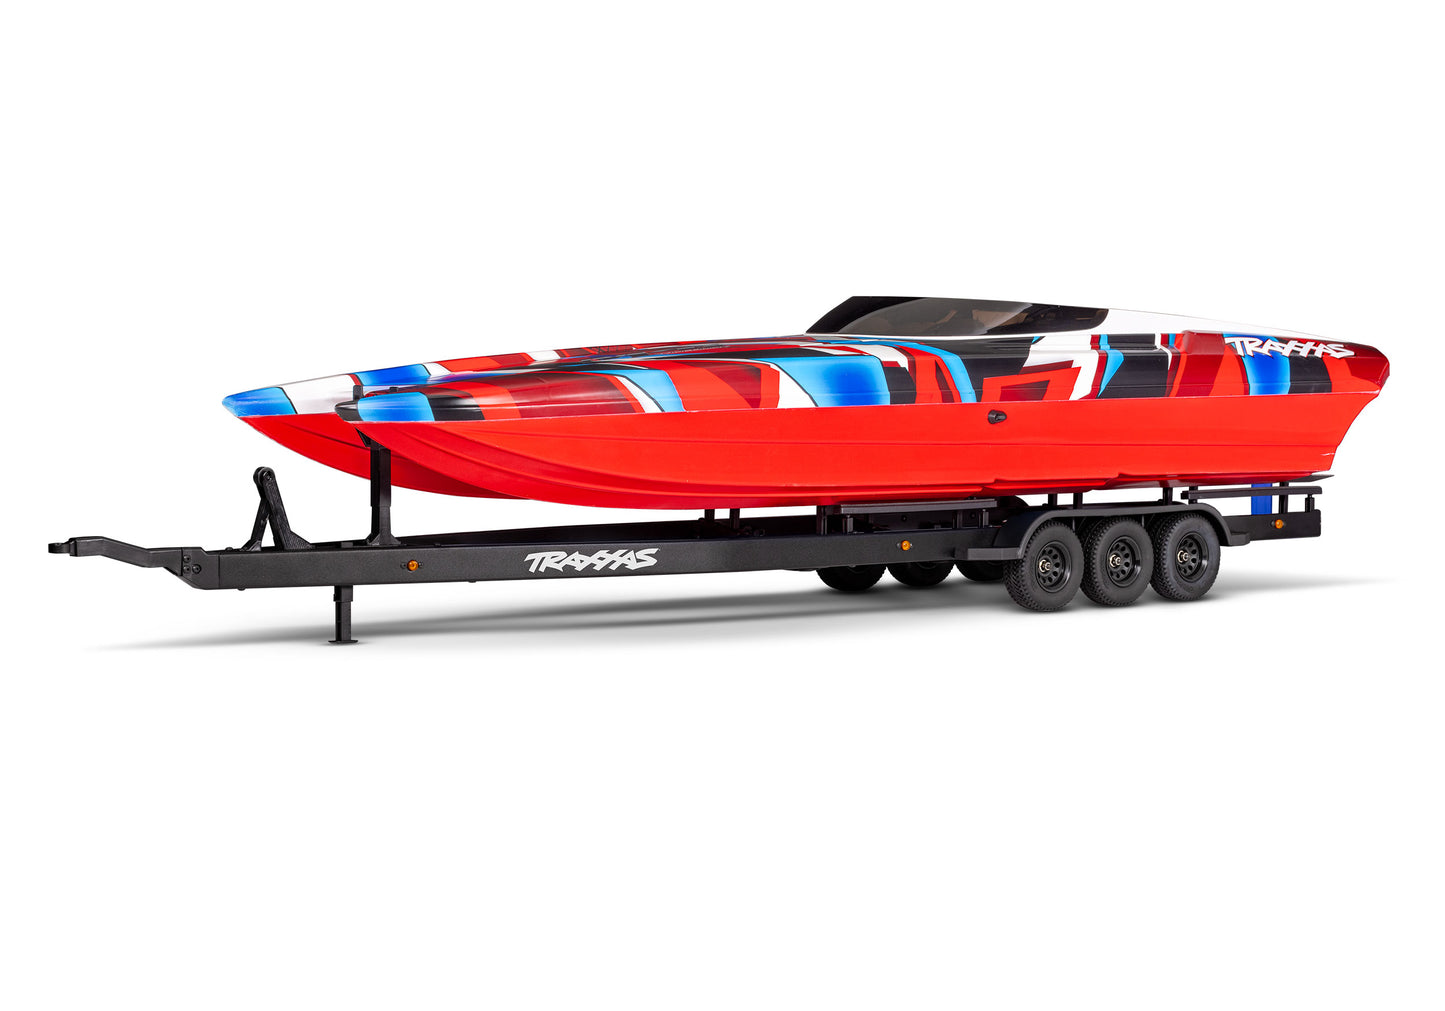 10350 Traxxas Boat Trailer, Spartan or DCB M41 (assembled with hitch)